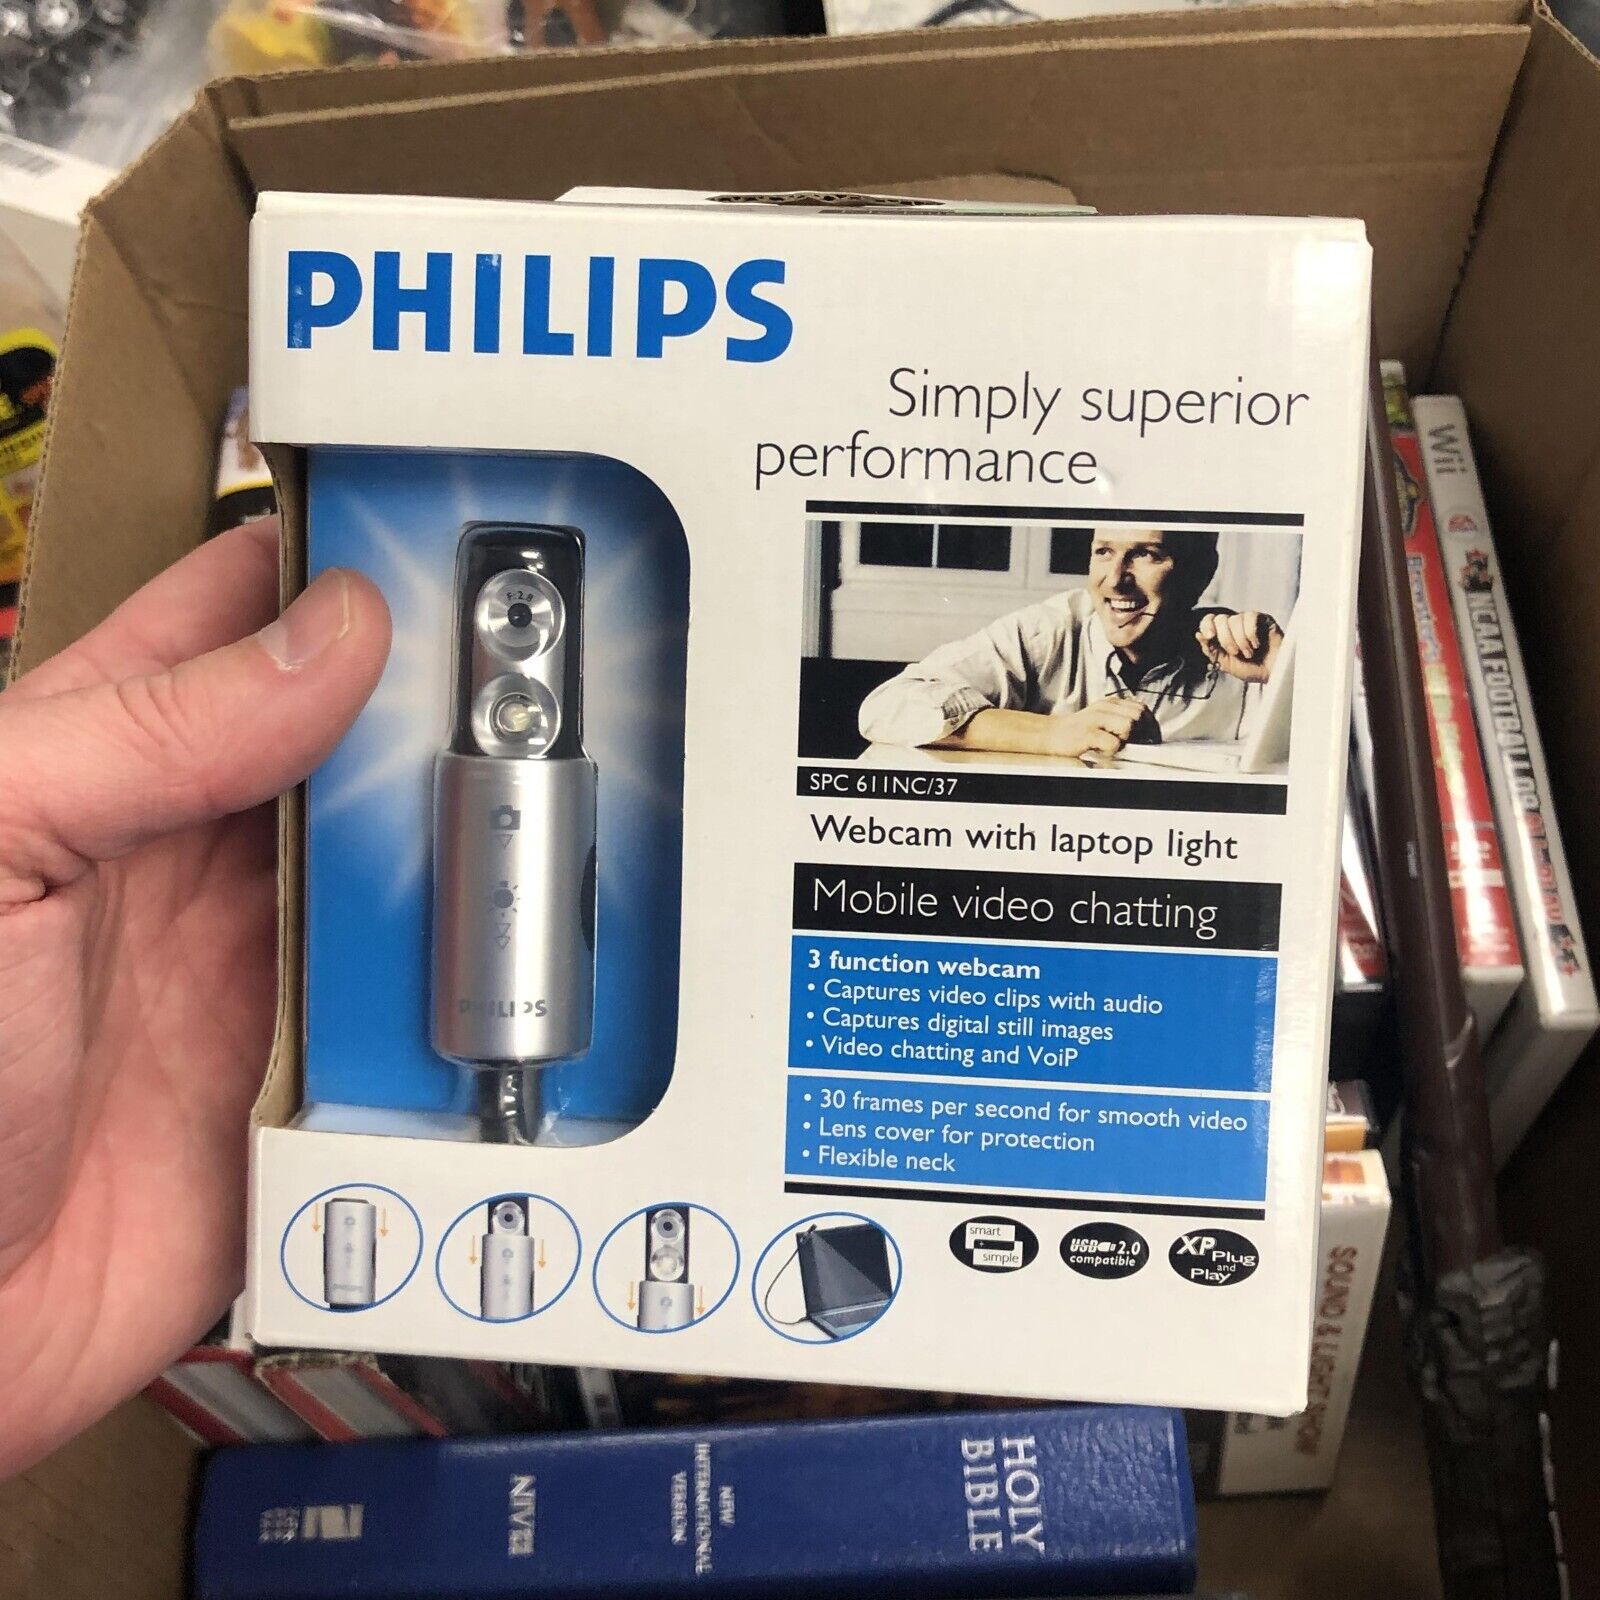 Philips Webcam with laptop light mobile video chatting SPC 611NC/37 NEW SEALED